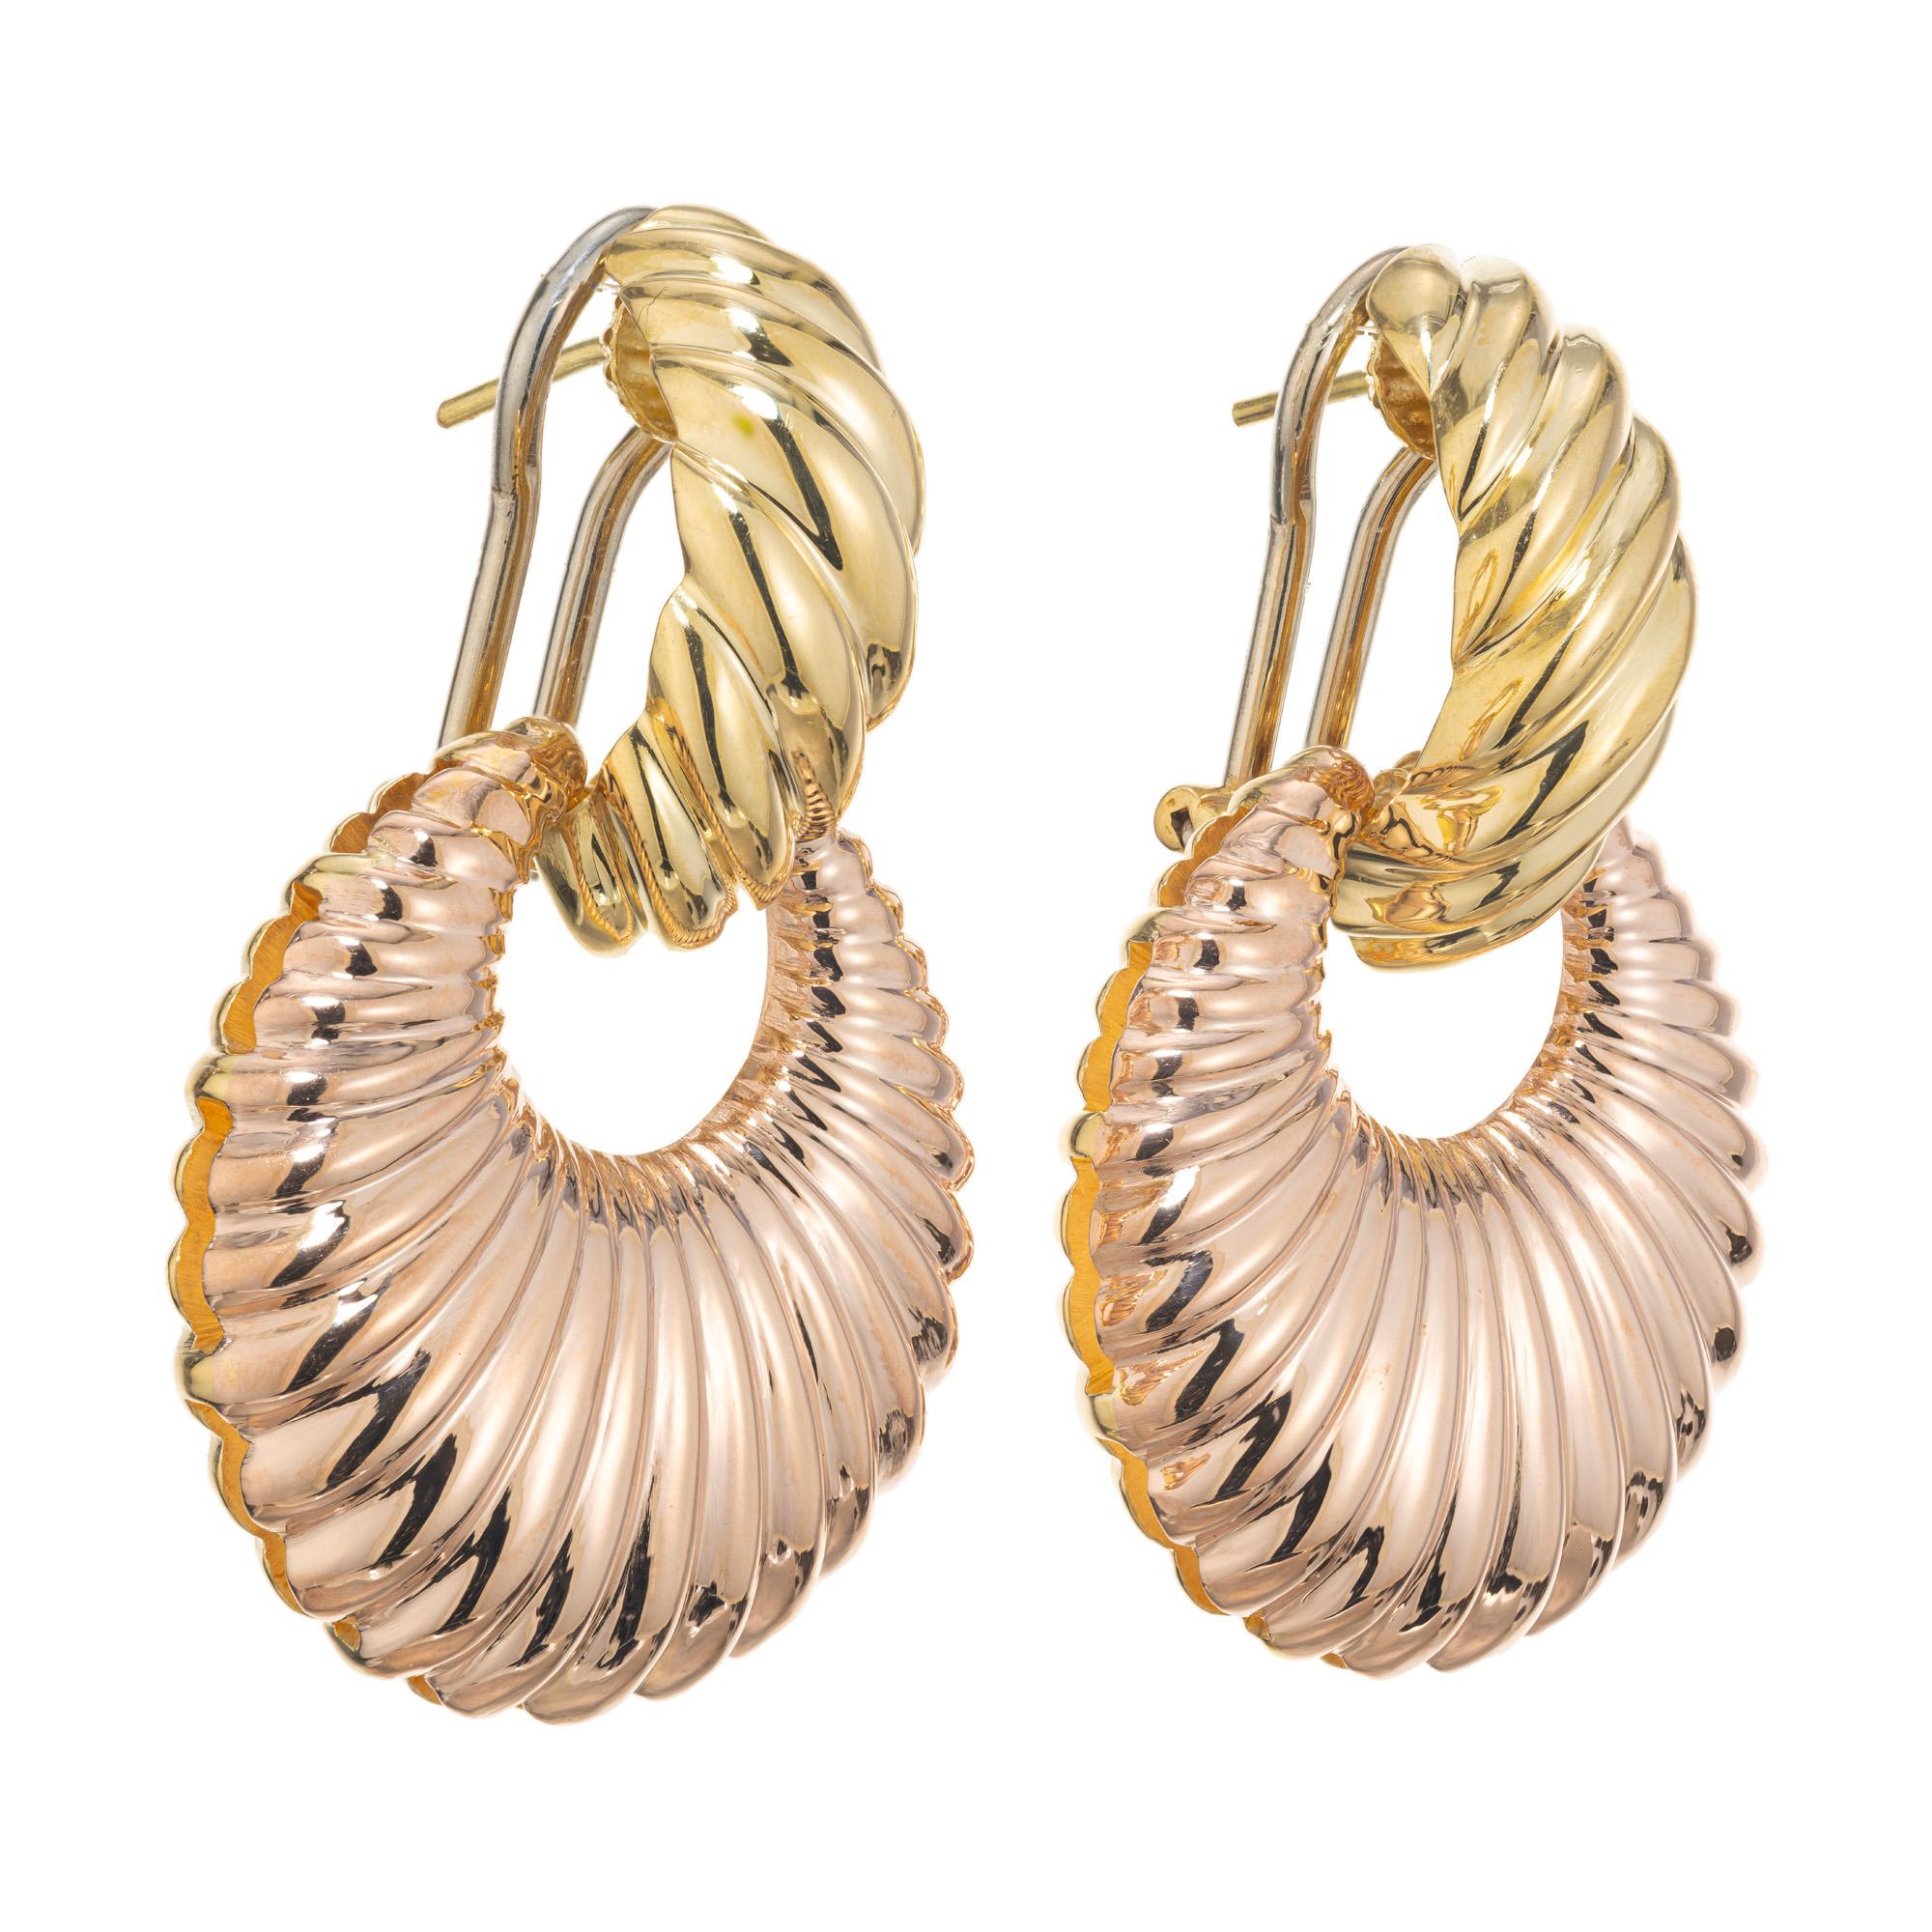 Two tone 18k rose and yellow gold dangle earrings. Shrimp style yellow gold tops with 18k white gold clip post earrings with each sporting a detachable round graduated 18k rose gold ribbed fan style dangle. Rich rose gold color complimented by